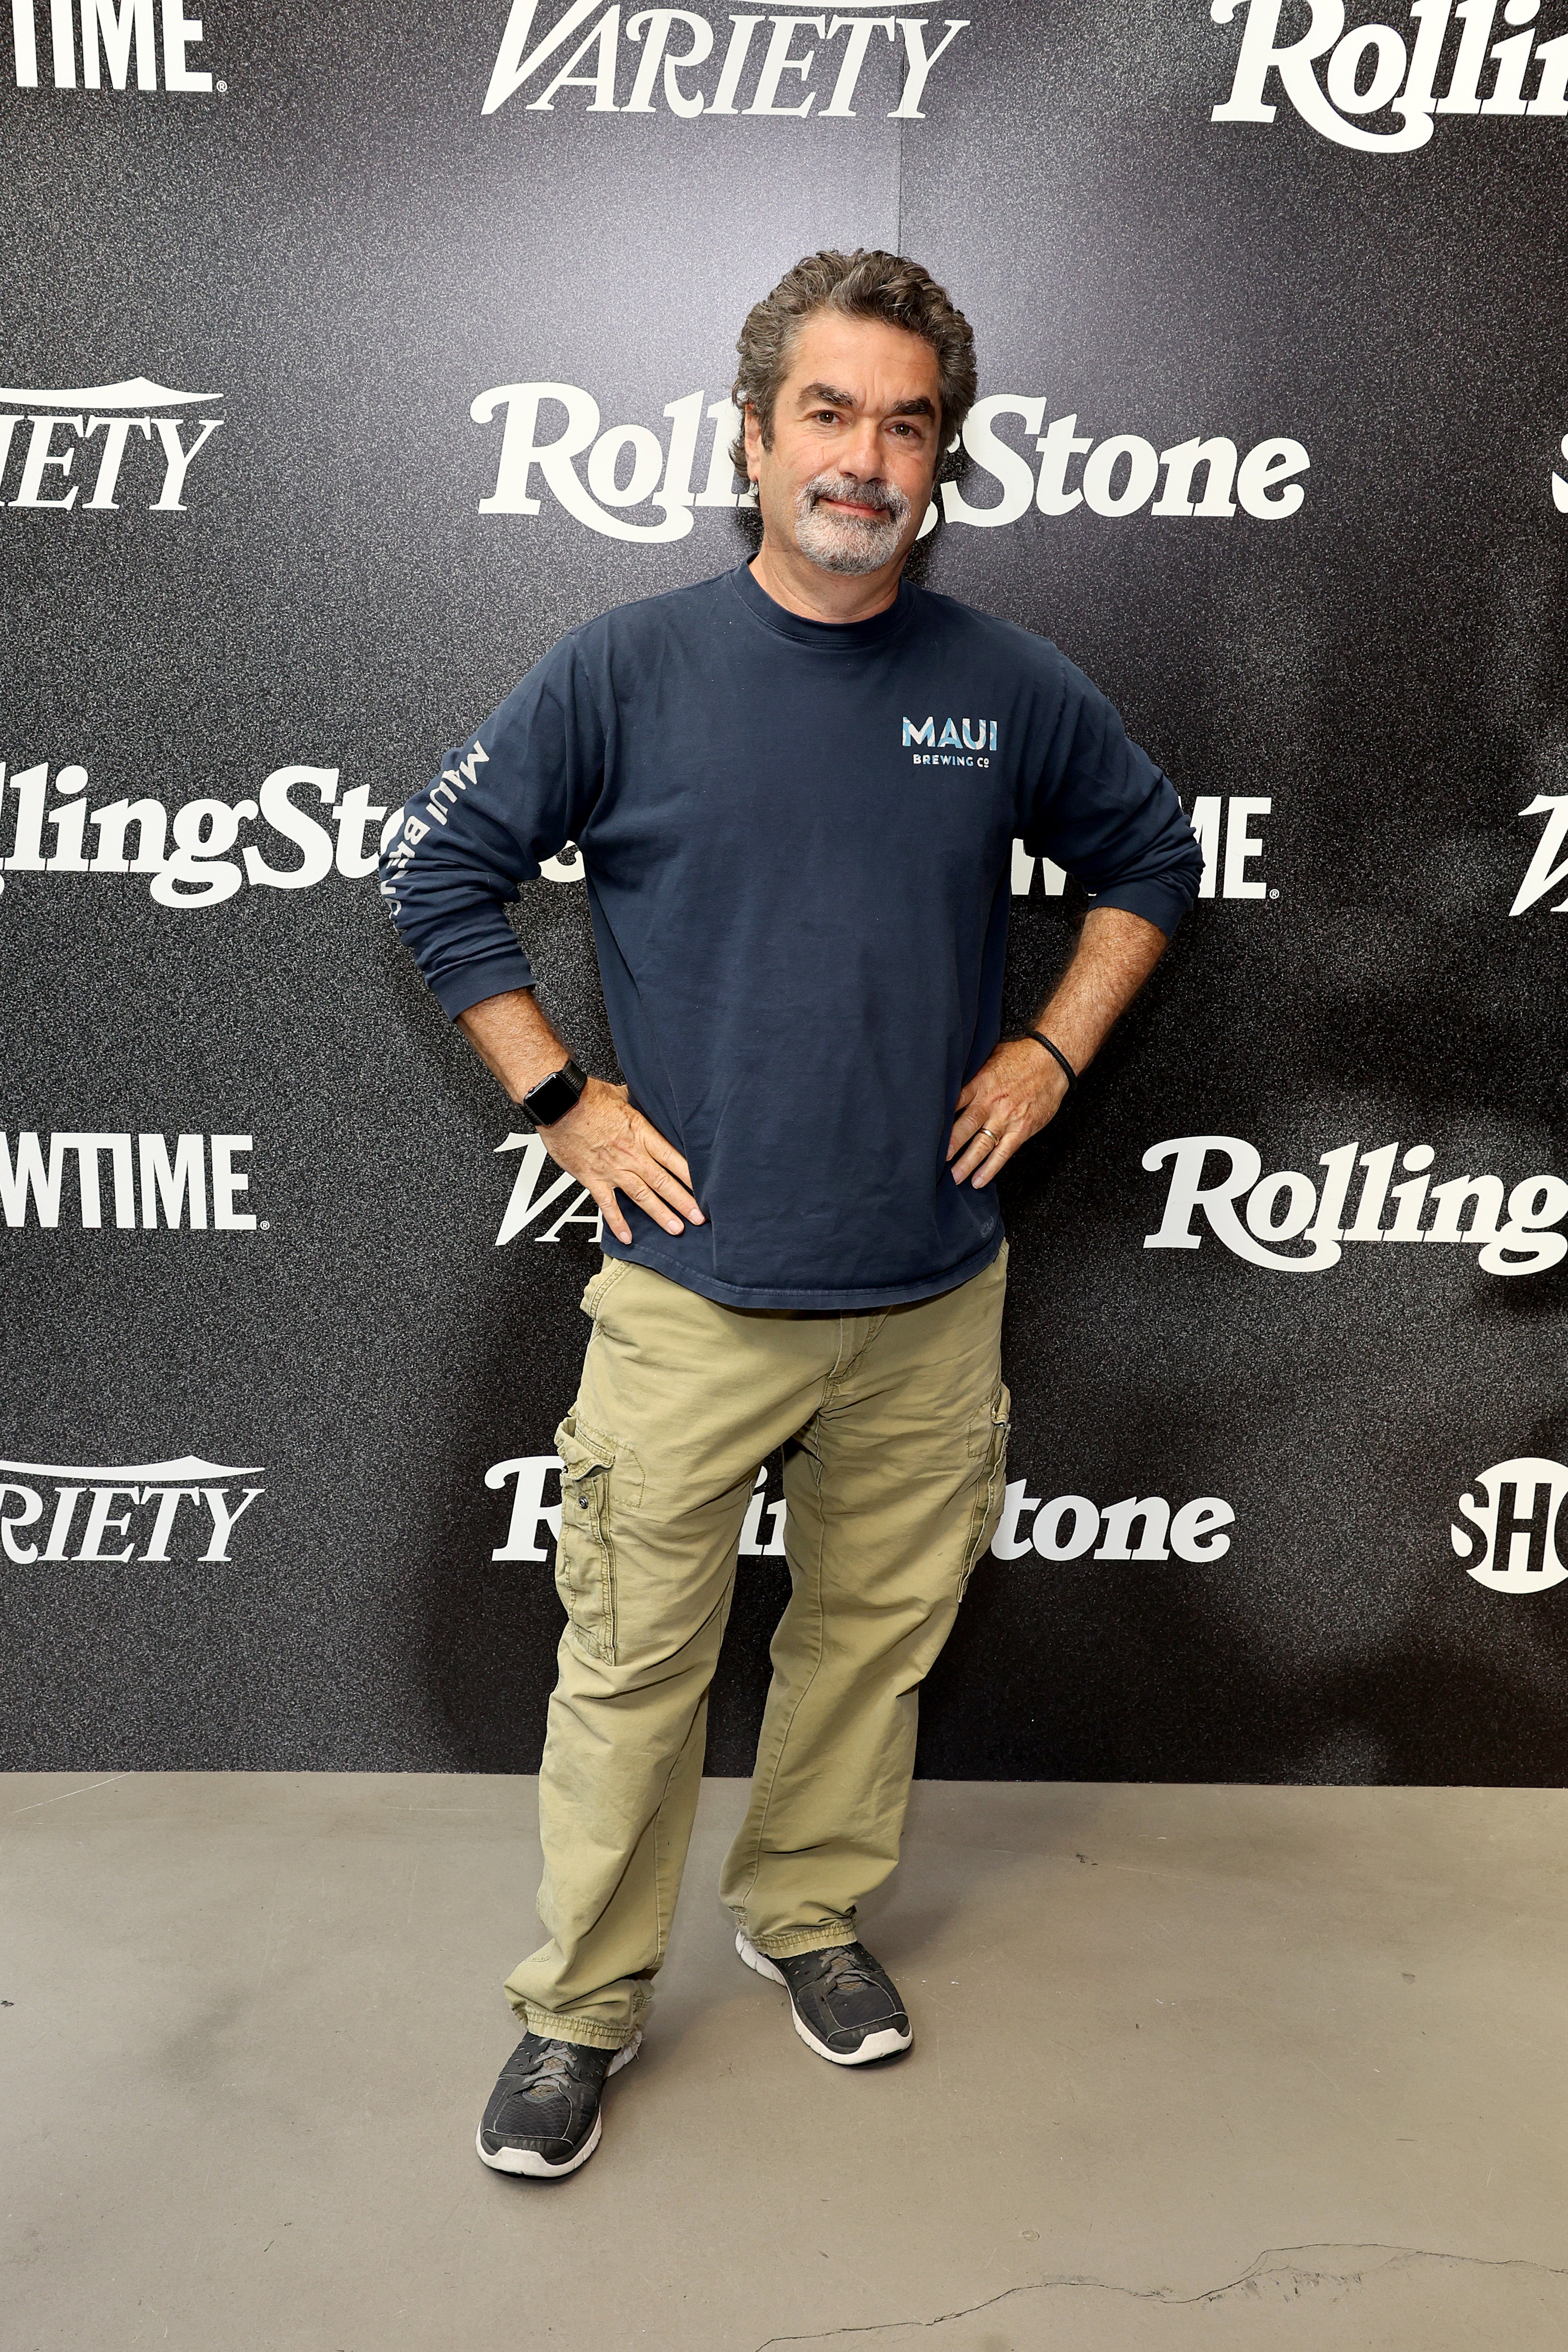 Joe Berlinger attends the Truth Seekers Summit hosted by Variety and Rolling Stone at Second Floor on 25 August 2022 in New York City